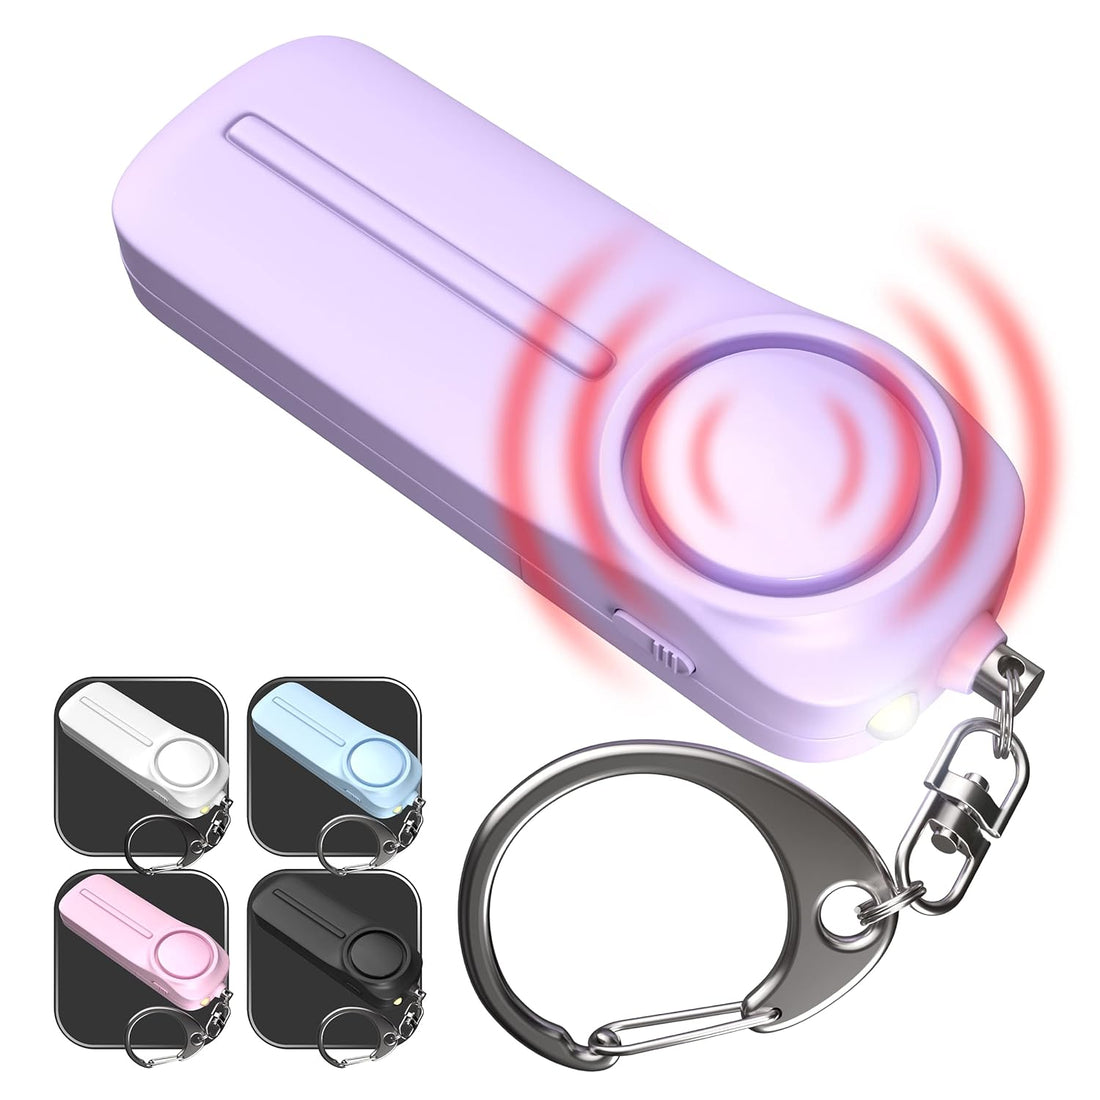 Self Defense Personal Alarm Keychain – 130 dB Loud Siren Protection Device with LED Light – Emergency Alert Key Chain Whistle for Women, Men, Children, Senior, and Joggers by WETEN (Purple)